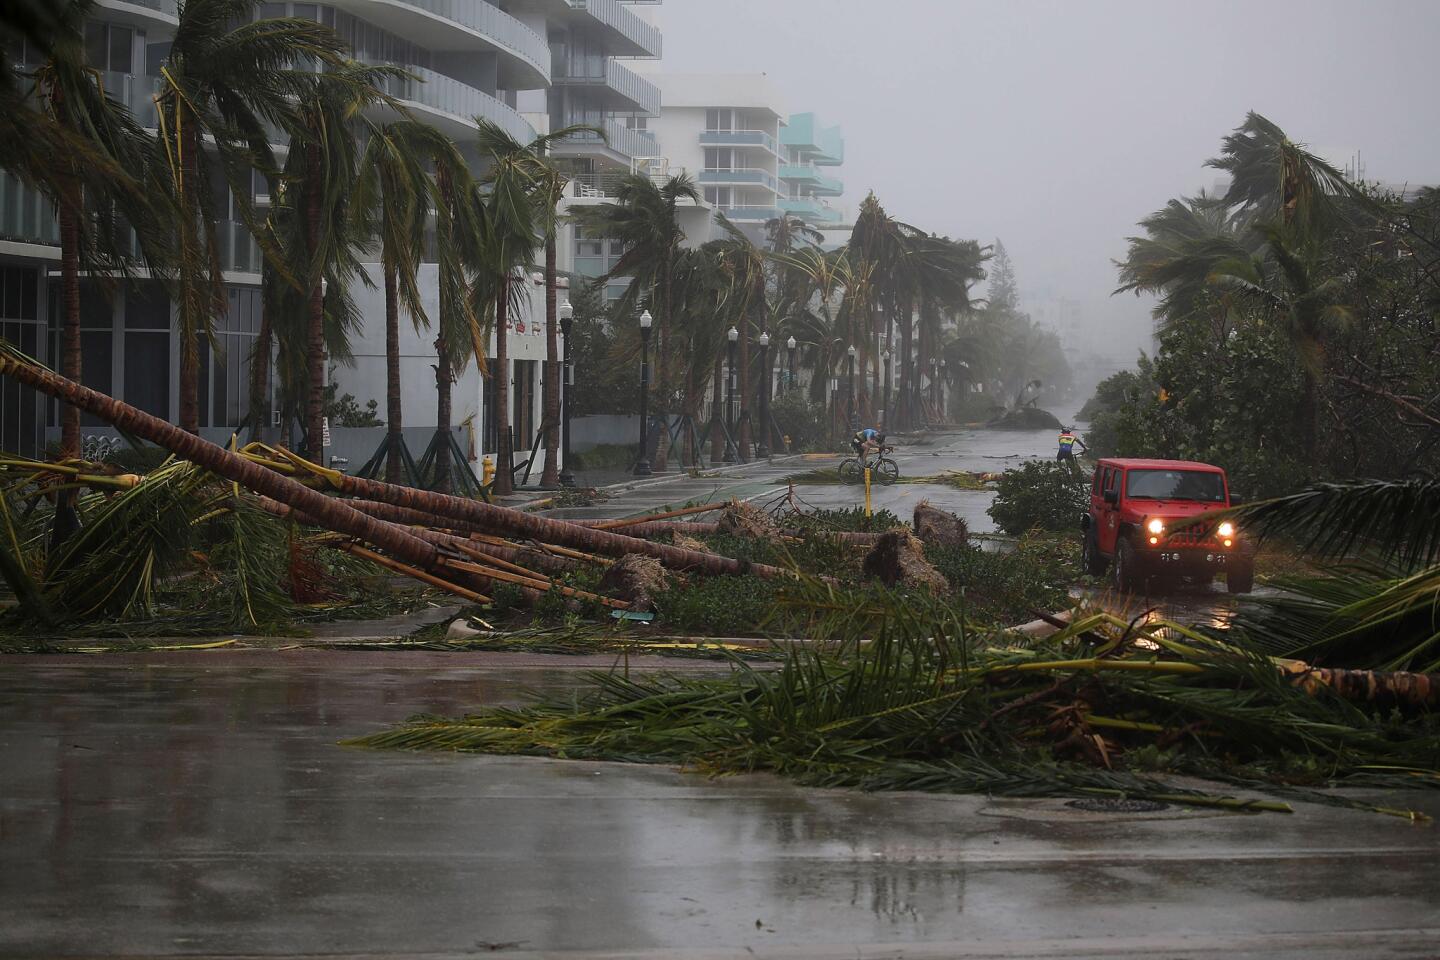 A vehicle passes downed palm trees and two cyclists attempt to ride as Hurricane Irma passed through the area on Sept. 10, 2017, in Miami Beach, Florida.